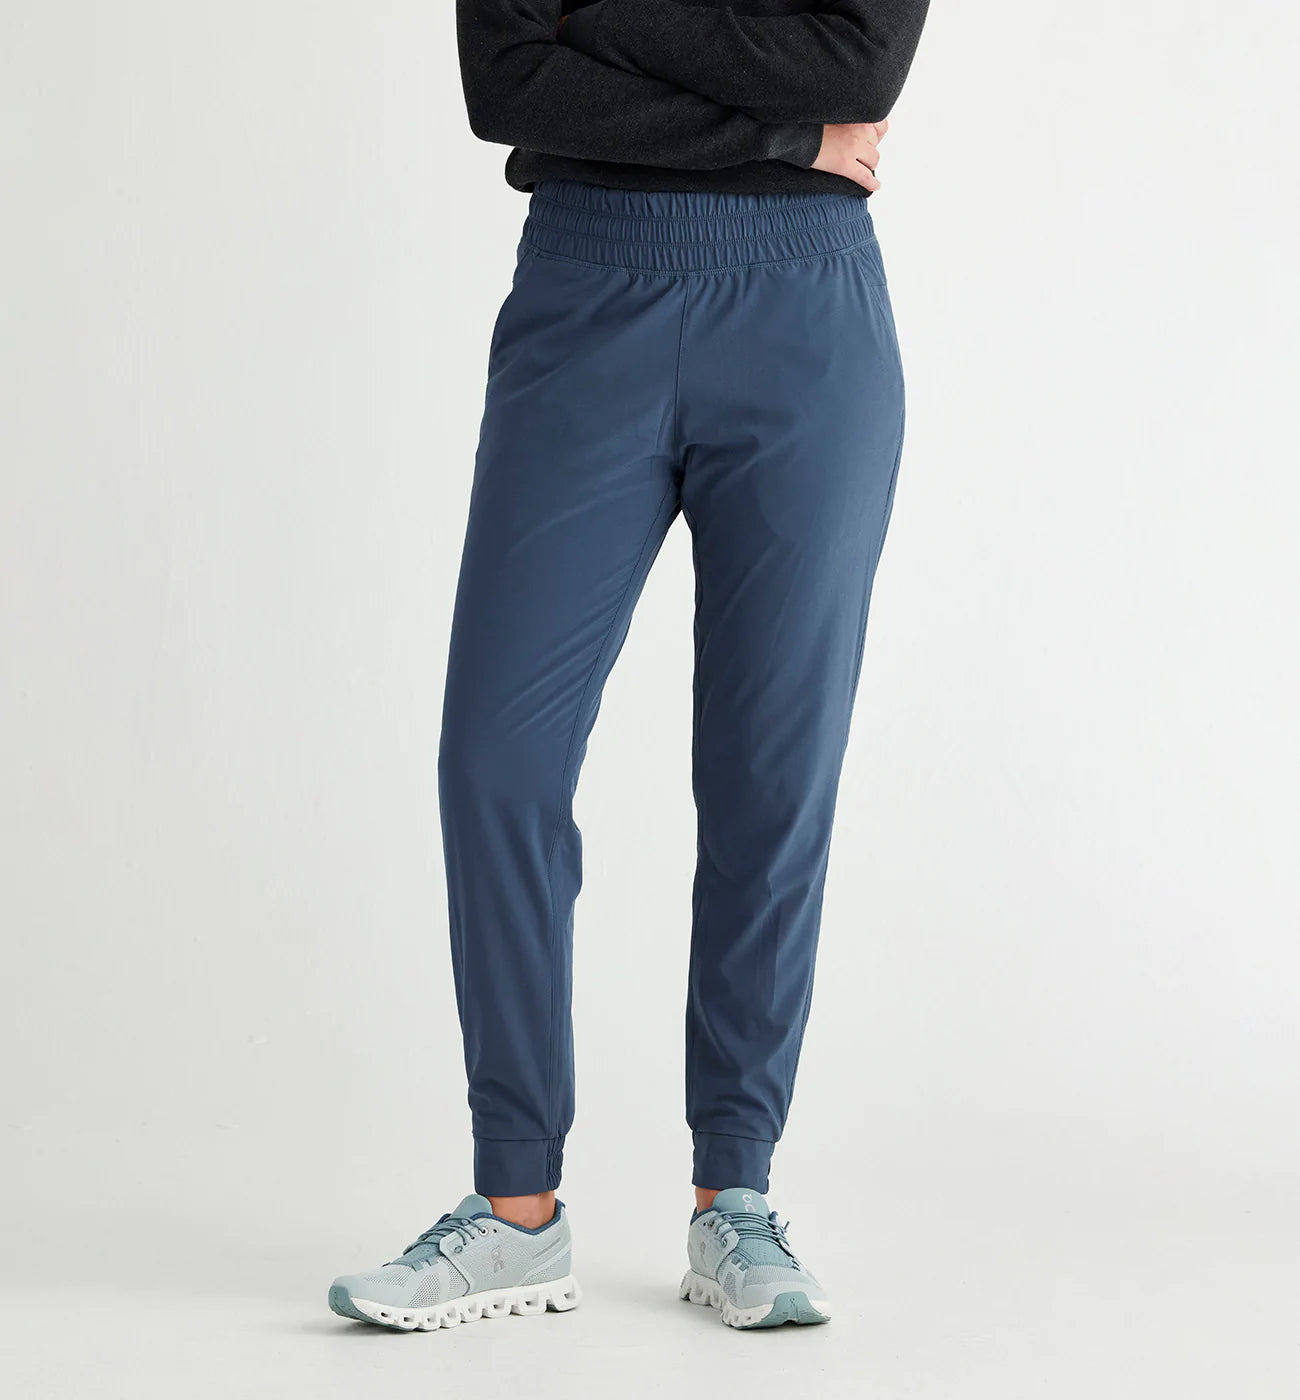 Lululemon Stretch High-Rise Jogger, Water Drop, Size 6